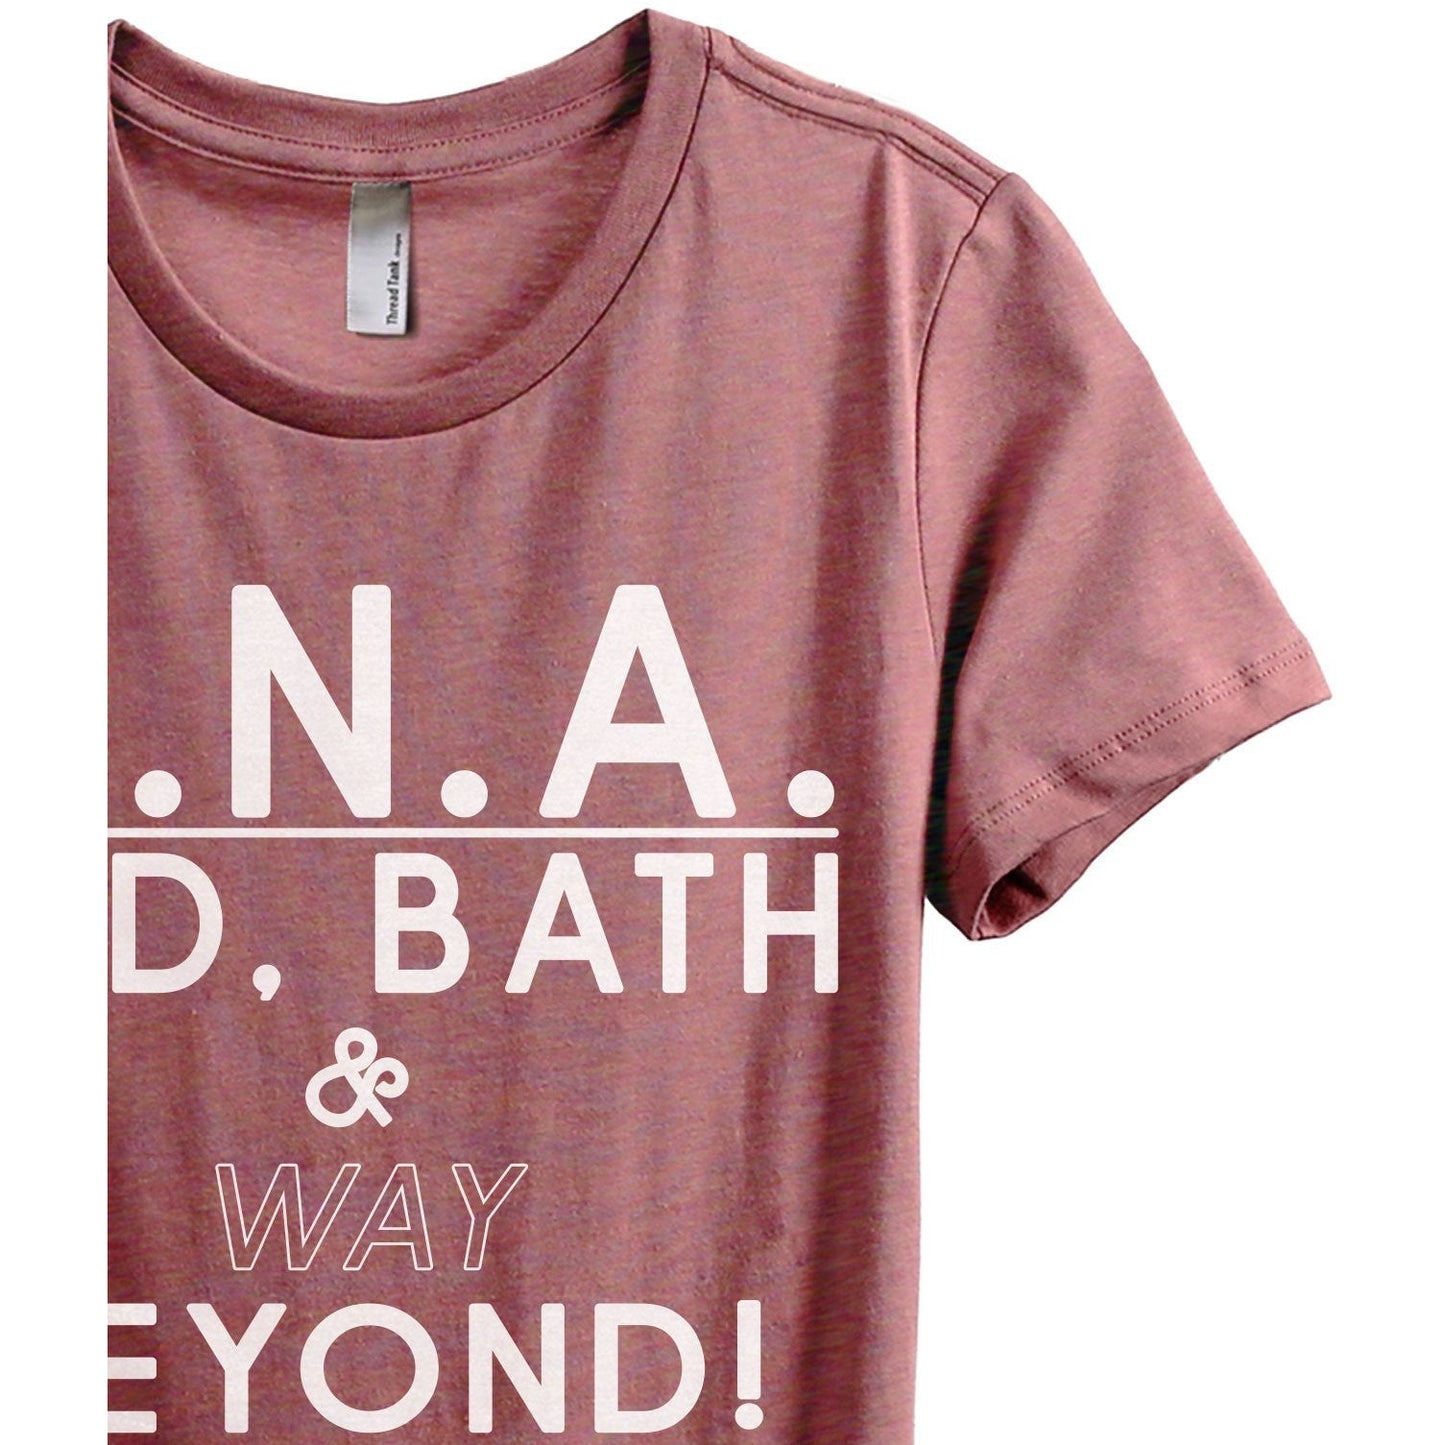 CNA Bed Bath And Way Beyond Women's Relaxed Crewneck T-Shirt Top Tee Heather Rouge Zoom Details
